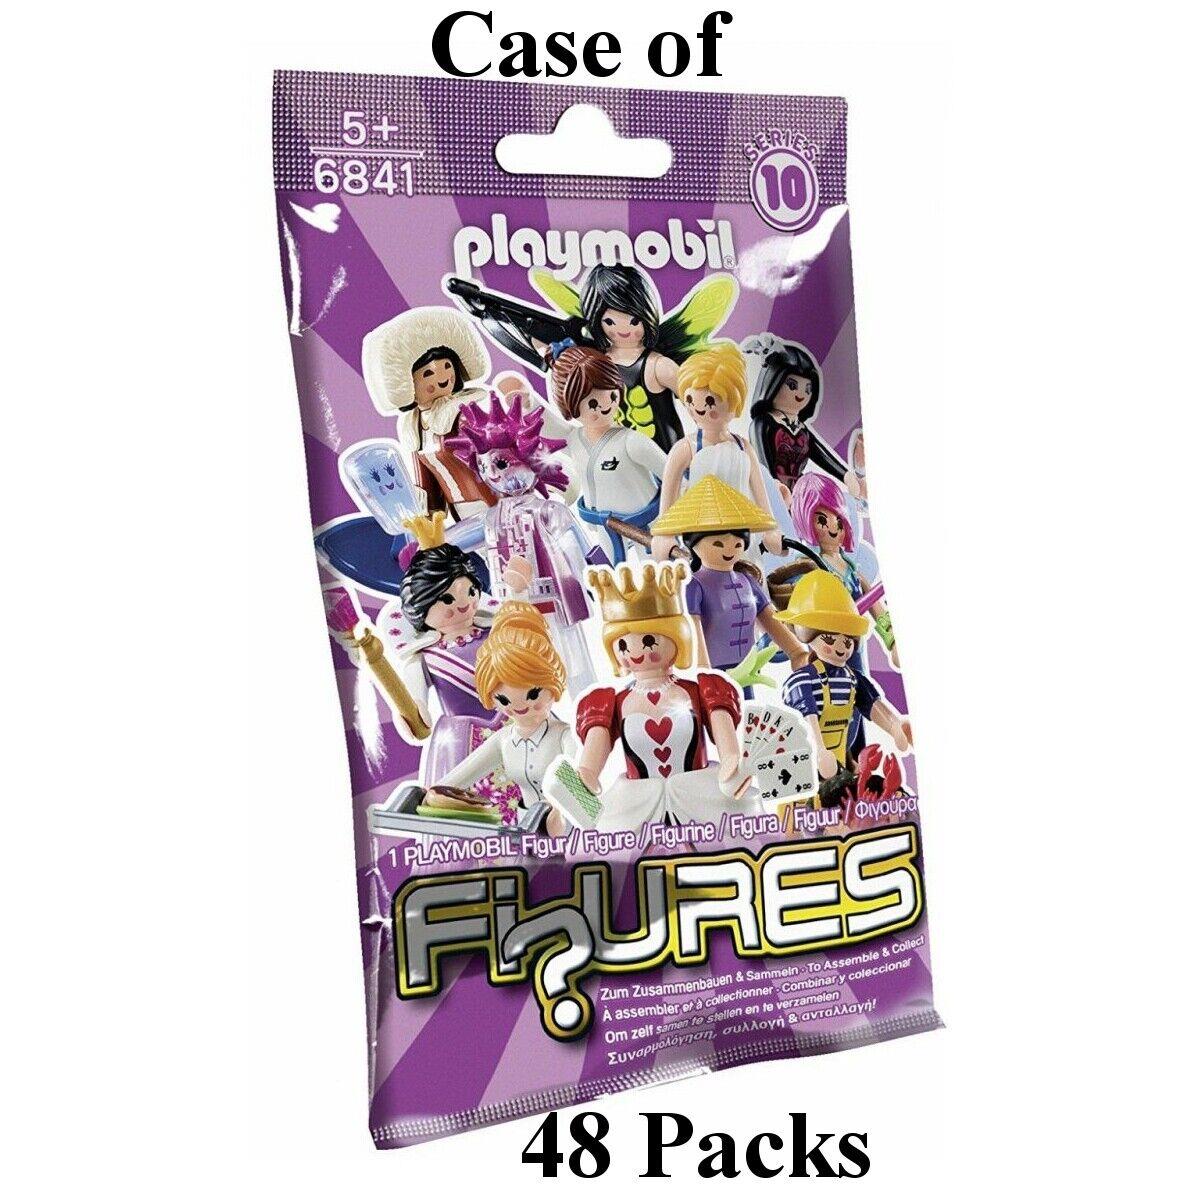 48 Packs Playmobil 6841 Series 10 Girls Mystery Figures Case of Fi Ures Box